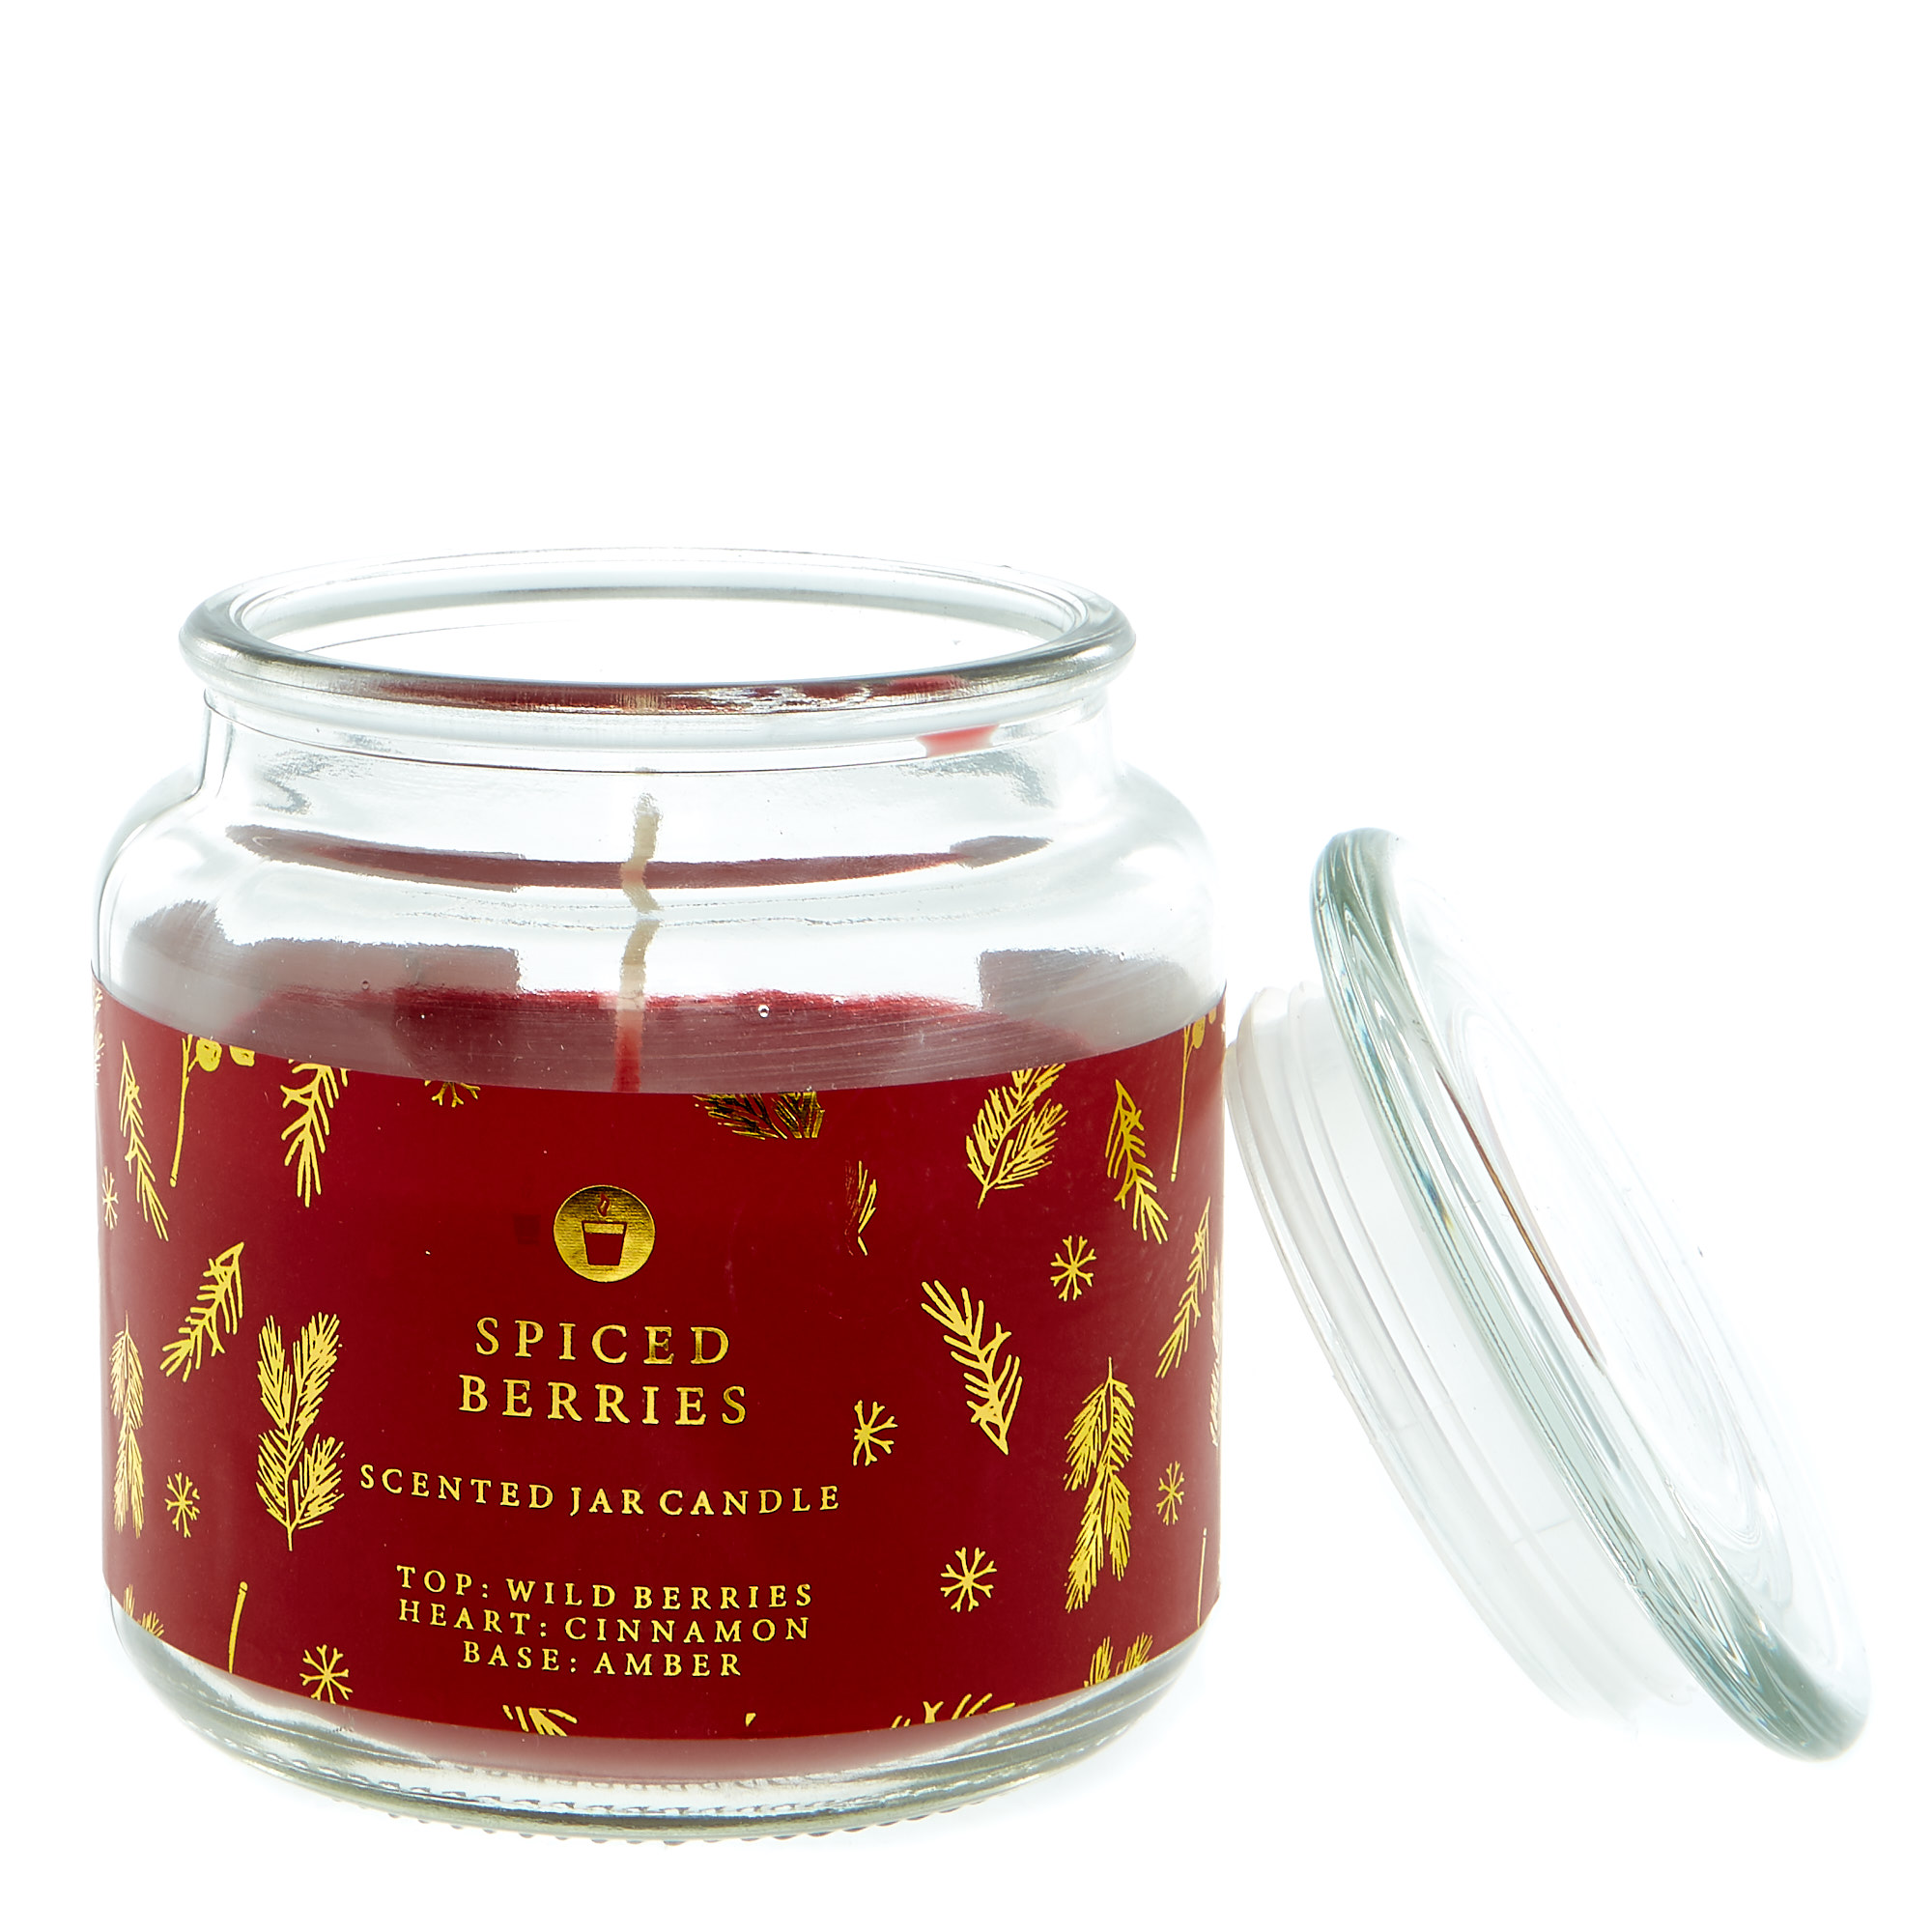 Spiced Berries Scented Jar Candle